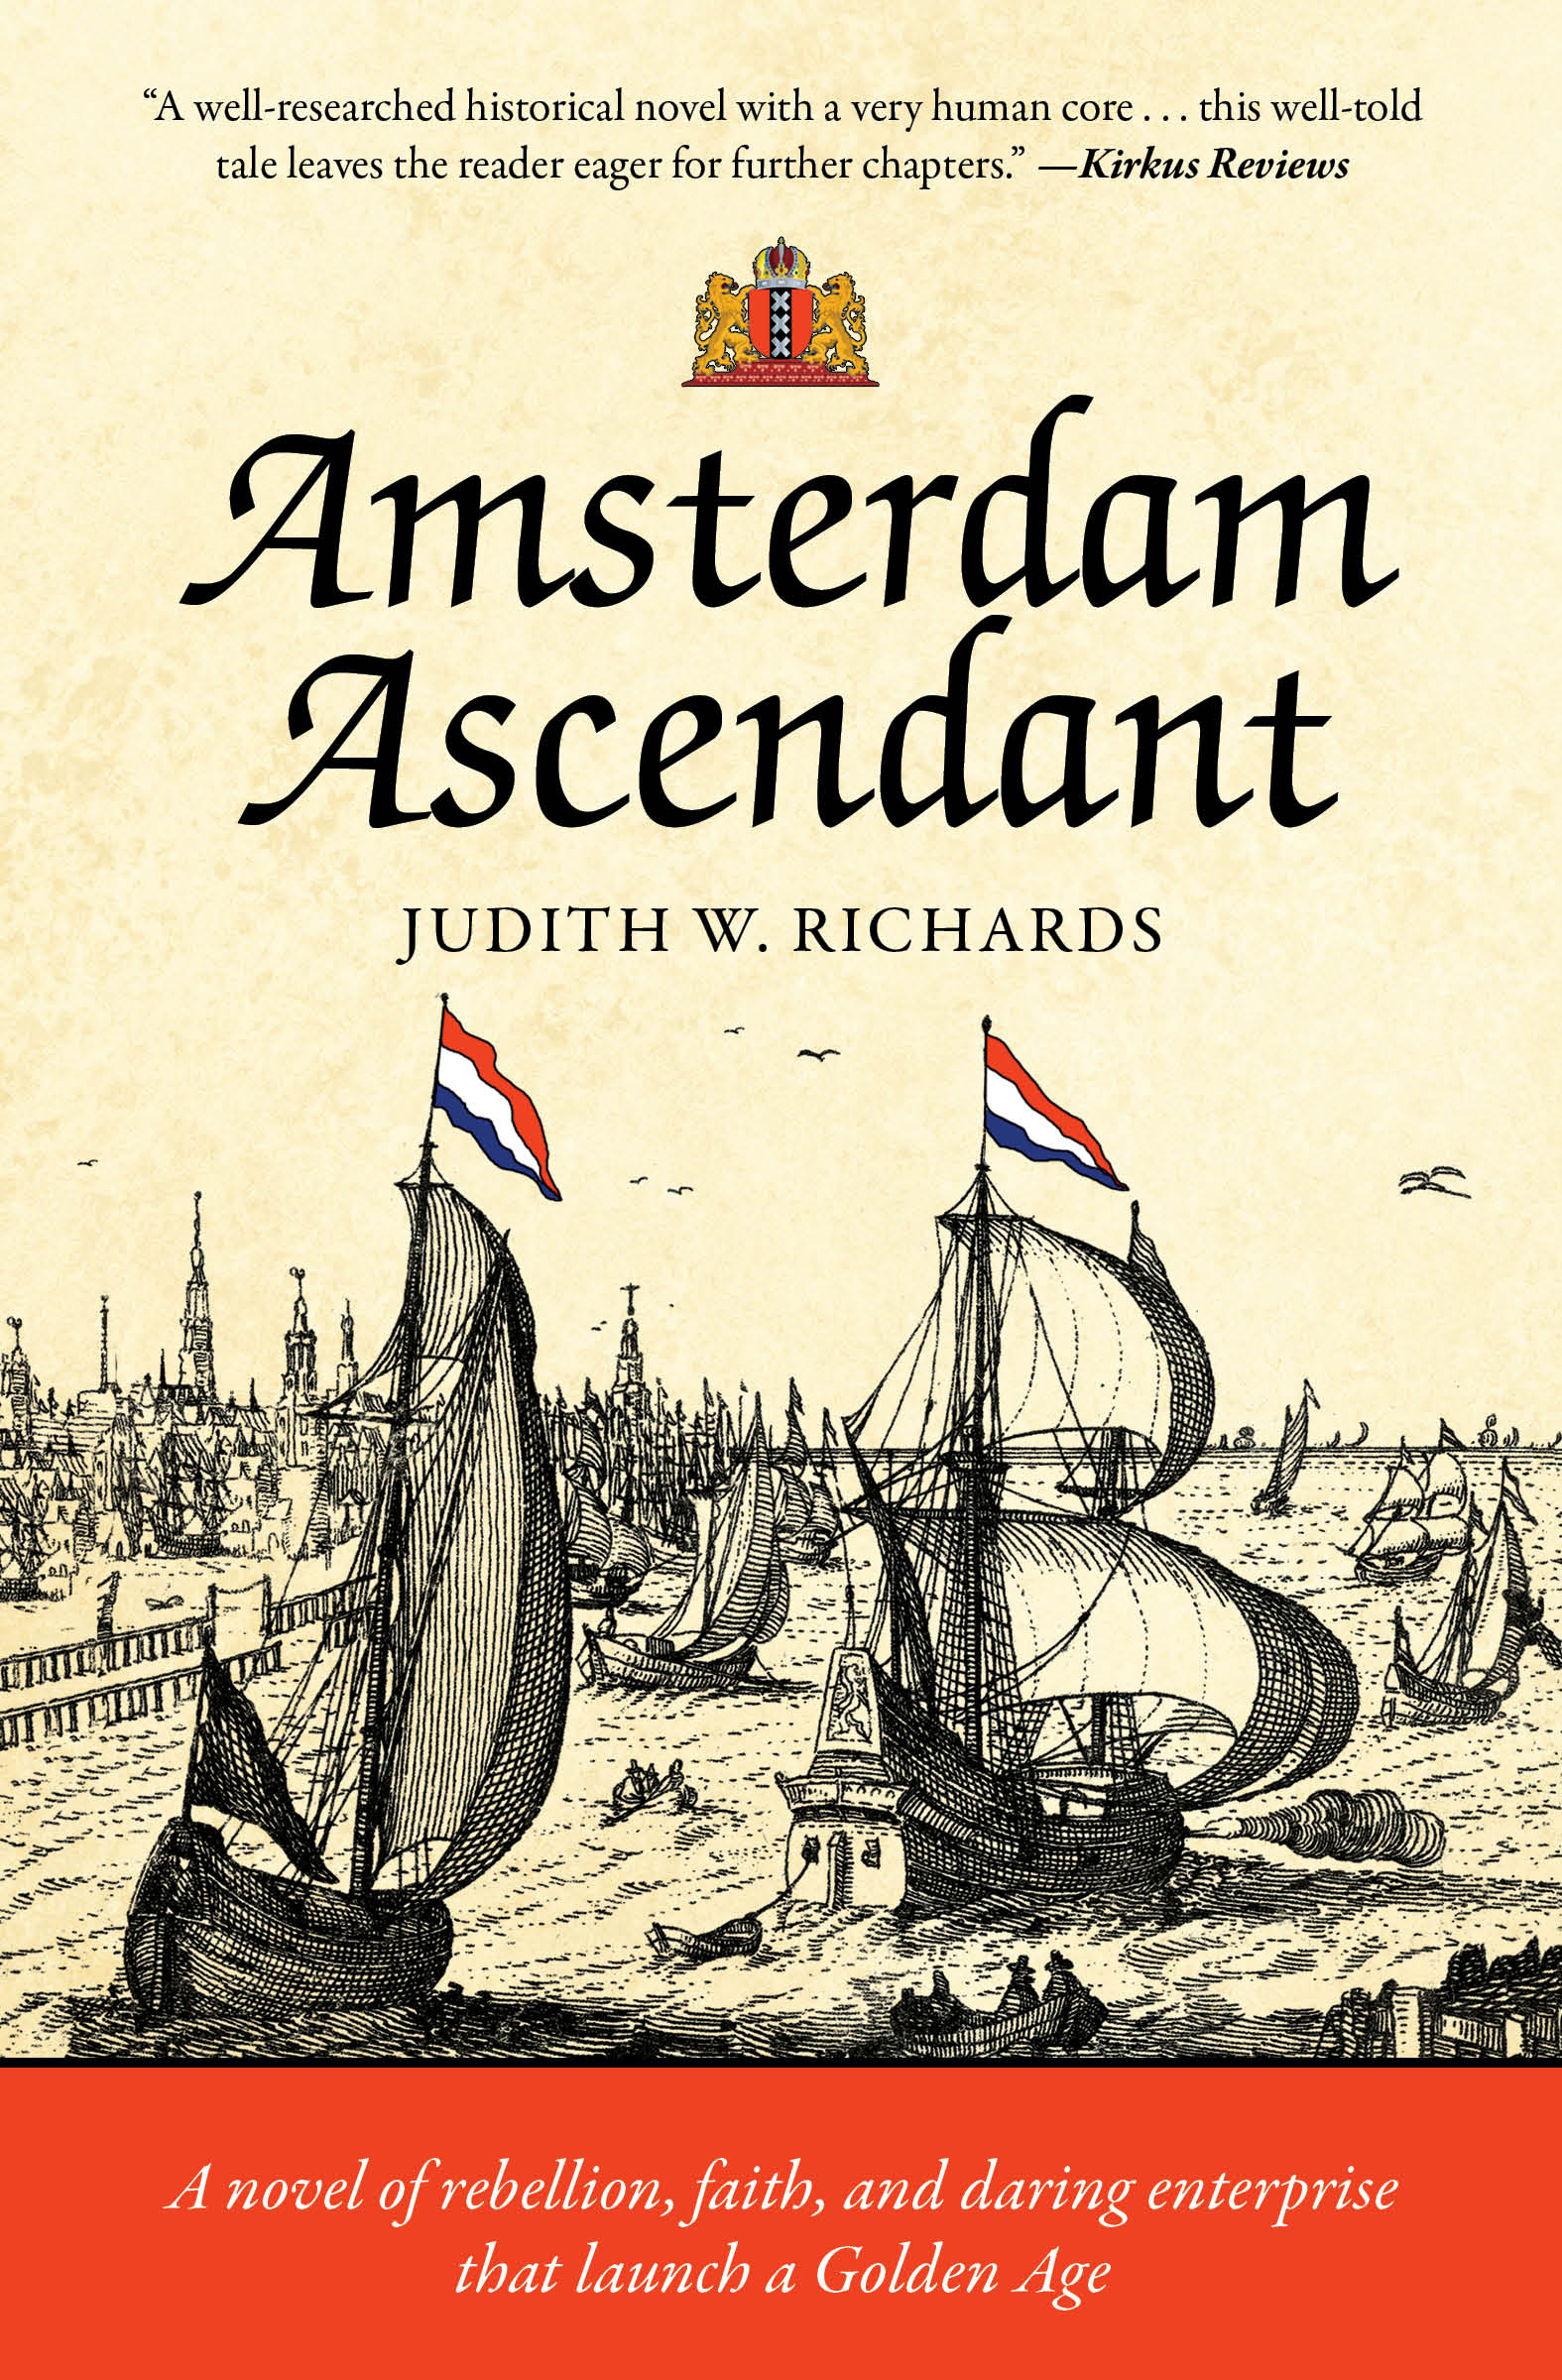 Image of Amsterdam Ascendant book featuring Amsterdam's 1500s harbor